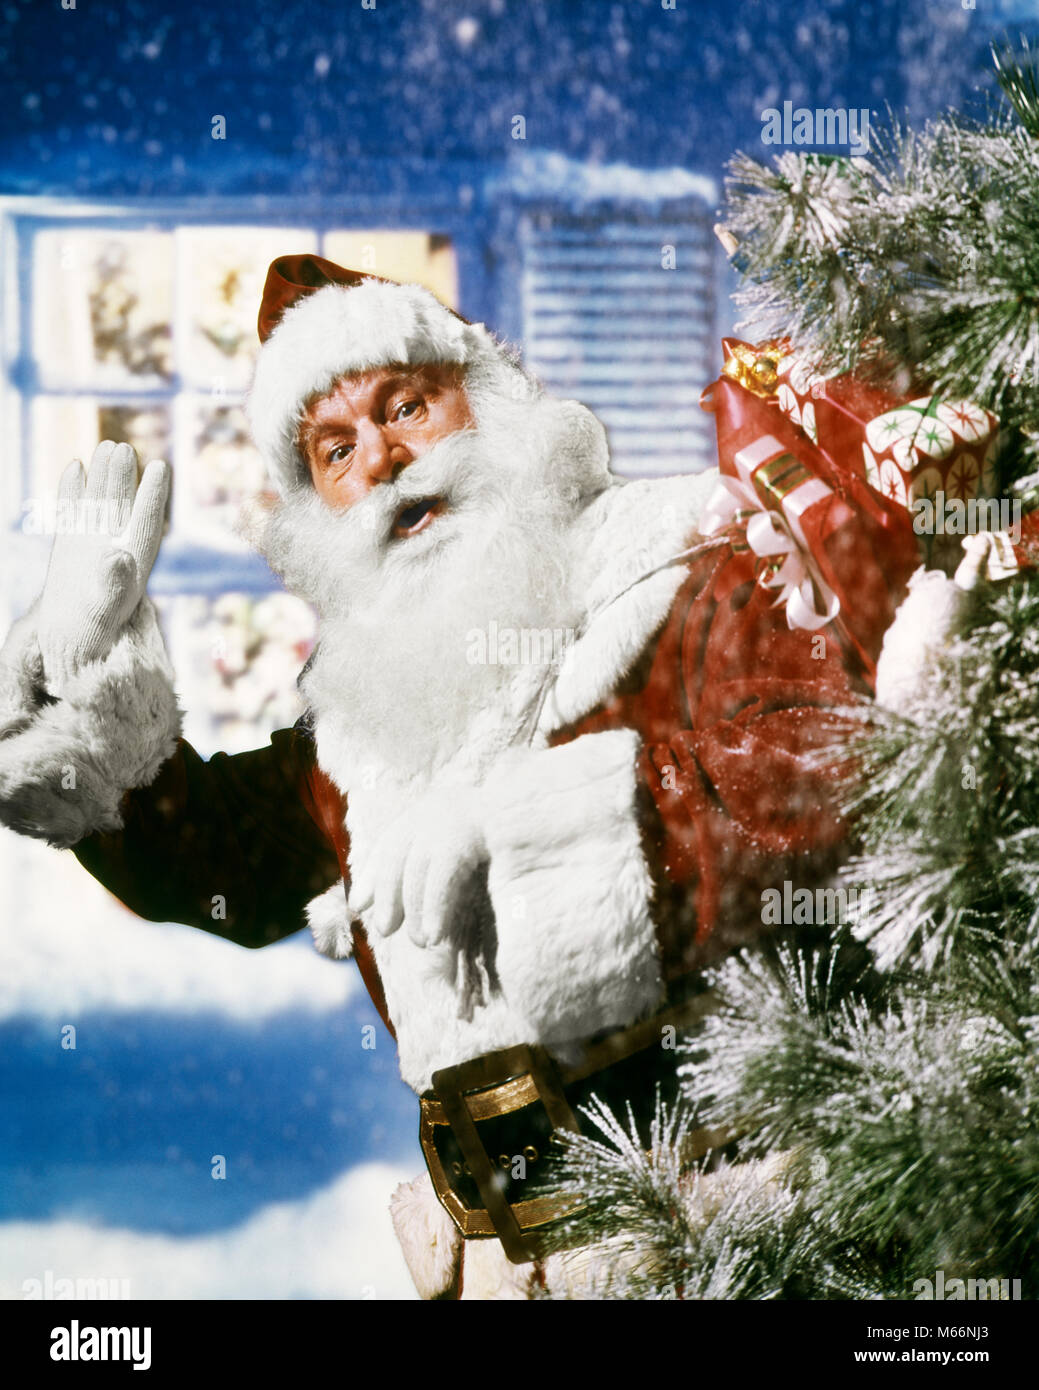 1950s 1960s 1970s SANTA CLAUS WITH PACK OF PRESENTS TOYS WAVING IN SNOW IN FRONT OF HOUSE OUTDOOR CHRISTMAS - ks7361 PHT001 HARS COMMUNICATION EVE PEACE CAUCASIAN JOY LIFESTYLE CELEBRATION JOBS ONE PERSON ONLY COPY SPACE FRIENDSHIP HALF-LENGTH ICON INSPIRATION WISE SENIOR MAN SAINT SENIOR ADULT NOSTALGIA WINTERTIME EYE CONTACT ICONS OCCUPATION CUSTOMER SERVICE WISDOM SYMBOLISM CHARACTERS COMPOSITE SPECIAL SANTA CLAUS OCCASION PEOPLE CHARACTERS RED SUIT ROTUND FACIAL HAIR SEASONS NICK SEASON WHITE FUR KRIS KRINGLE ST. NICK ELDERLY MAN SYMBOLIC BEARDS JOLLY MALES NICHOLAS PLUMP WHISKERS Stock Photo